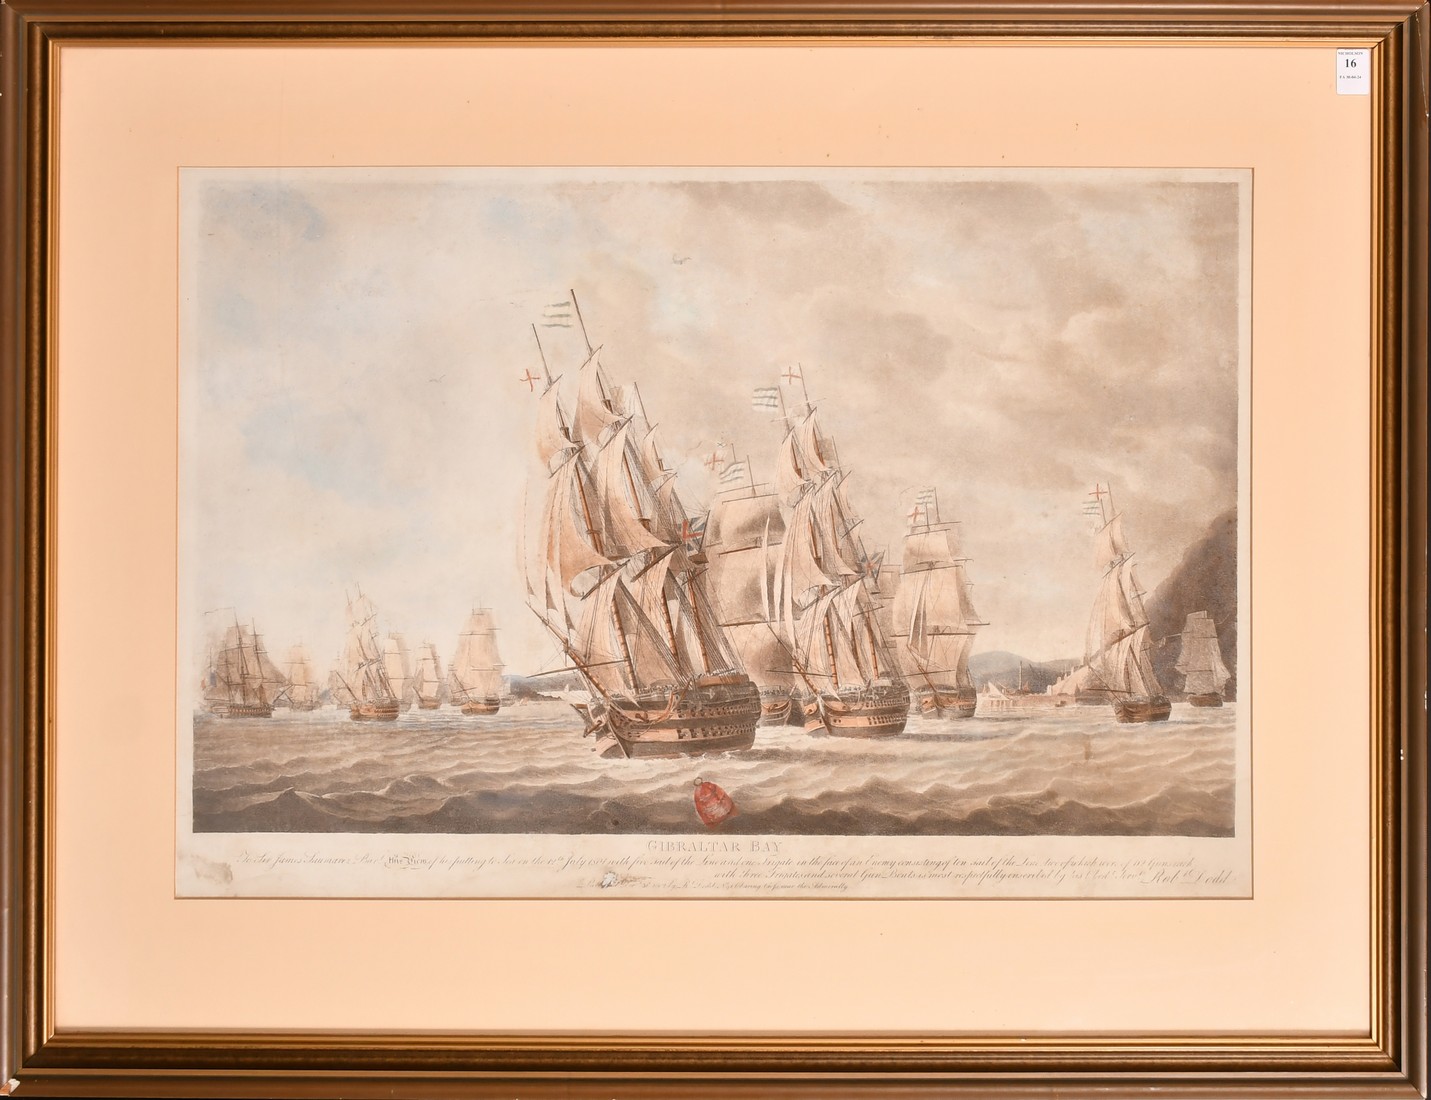 Robert Dodd, Gibraltar Bay, The Battle of Algericas, Possibly a later lithograph 19.5" x 28.5" - Image 2 of 3